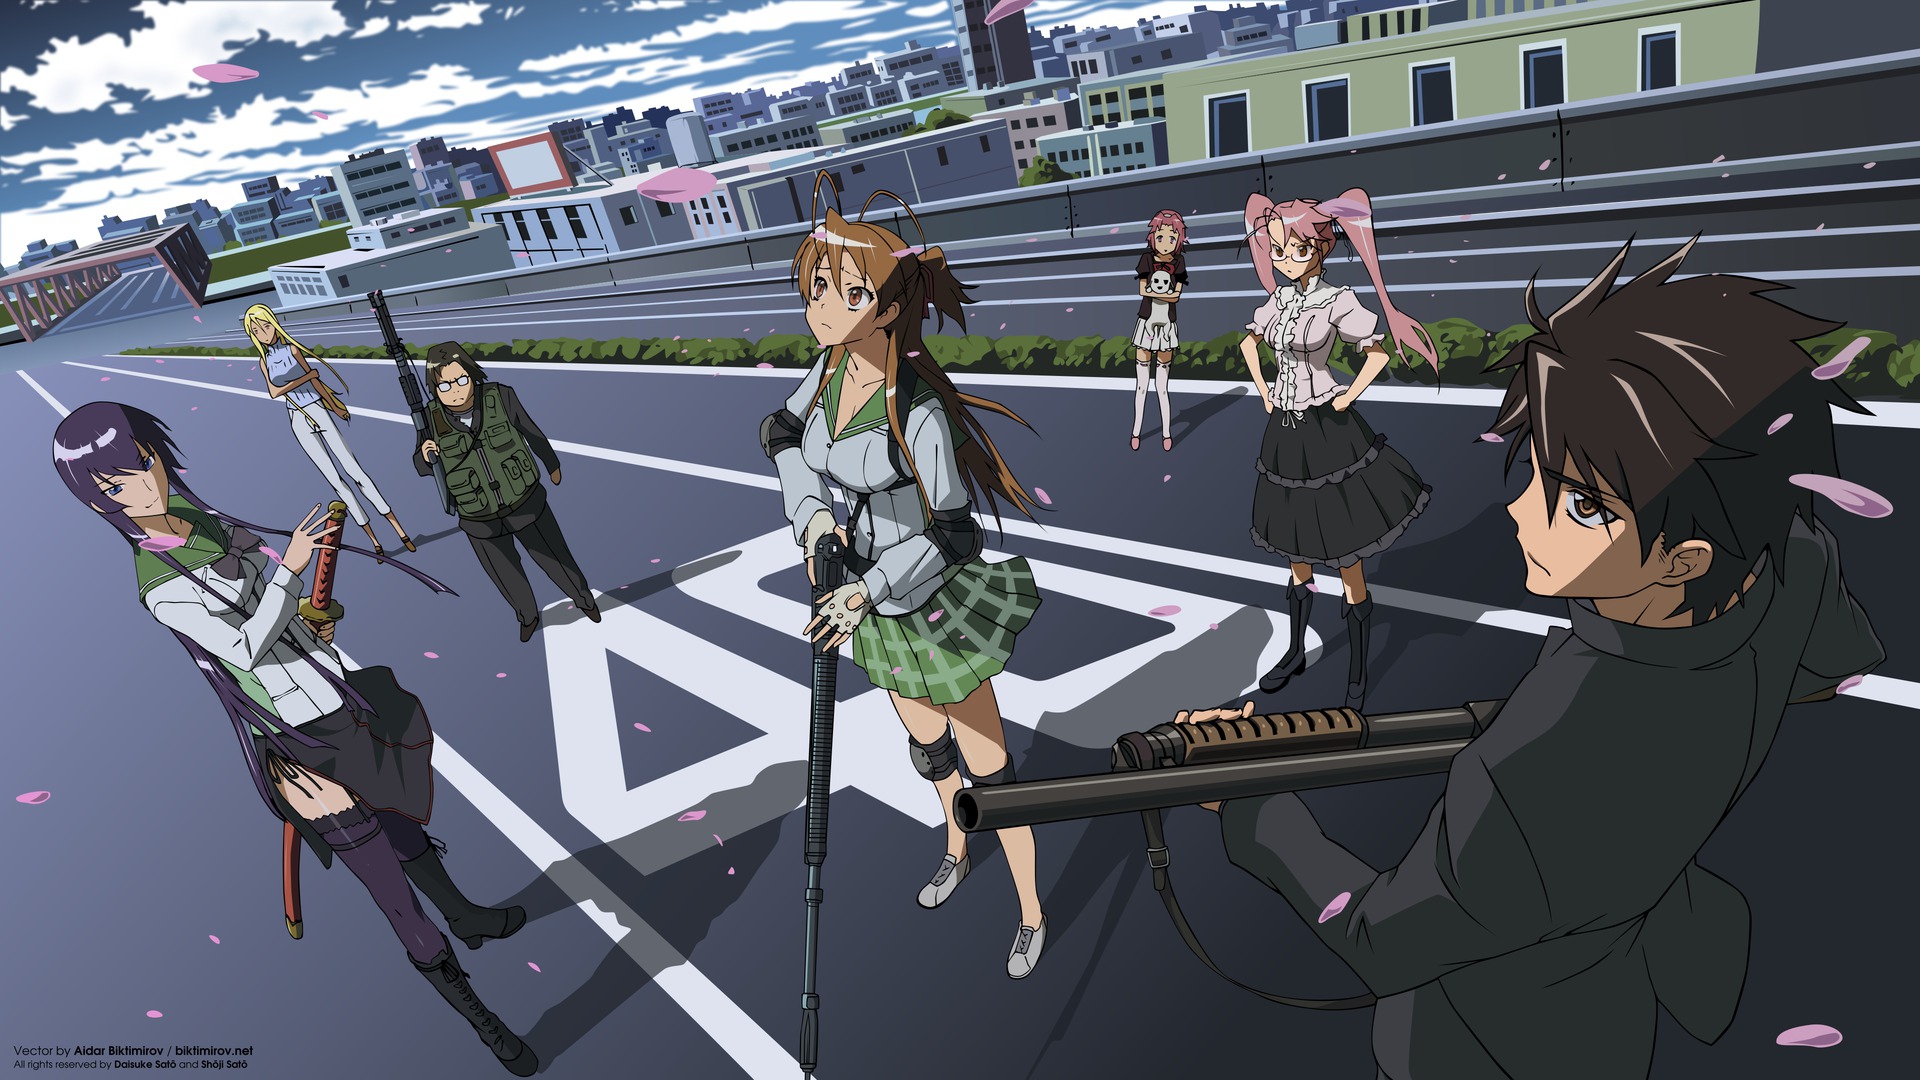 Highschool Of The Dead 1920X1080 Wallpapers